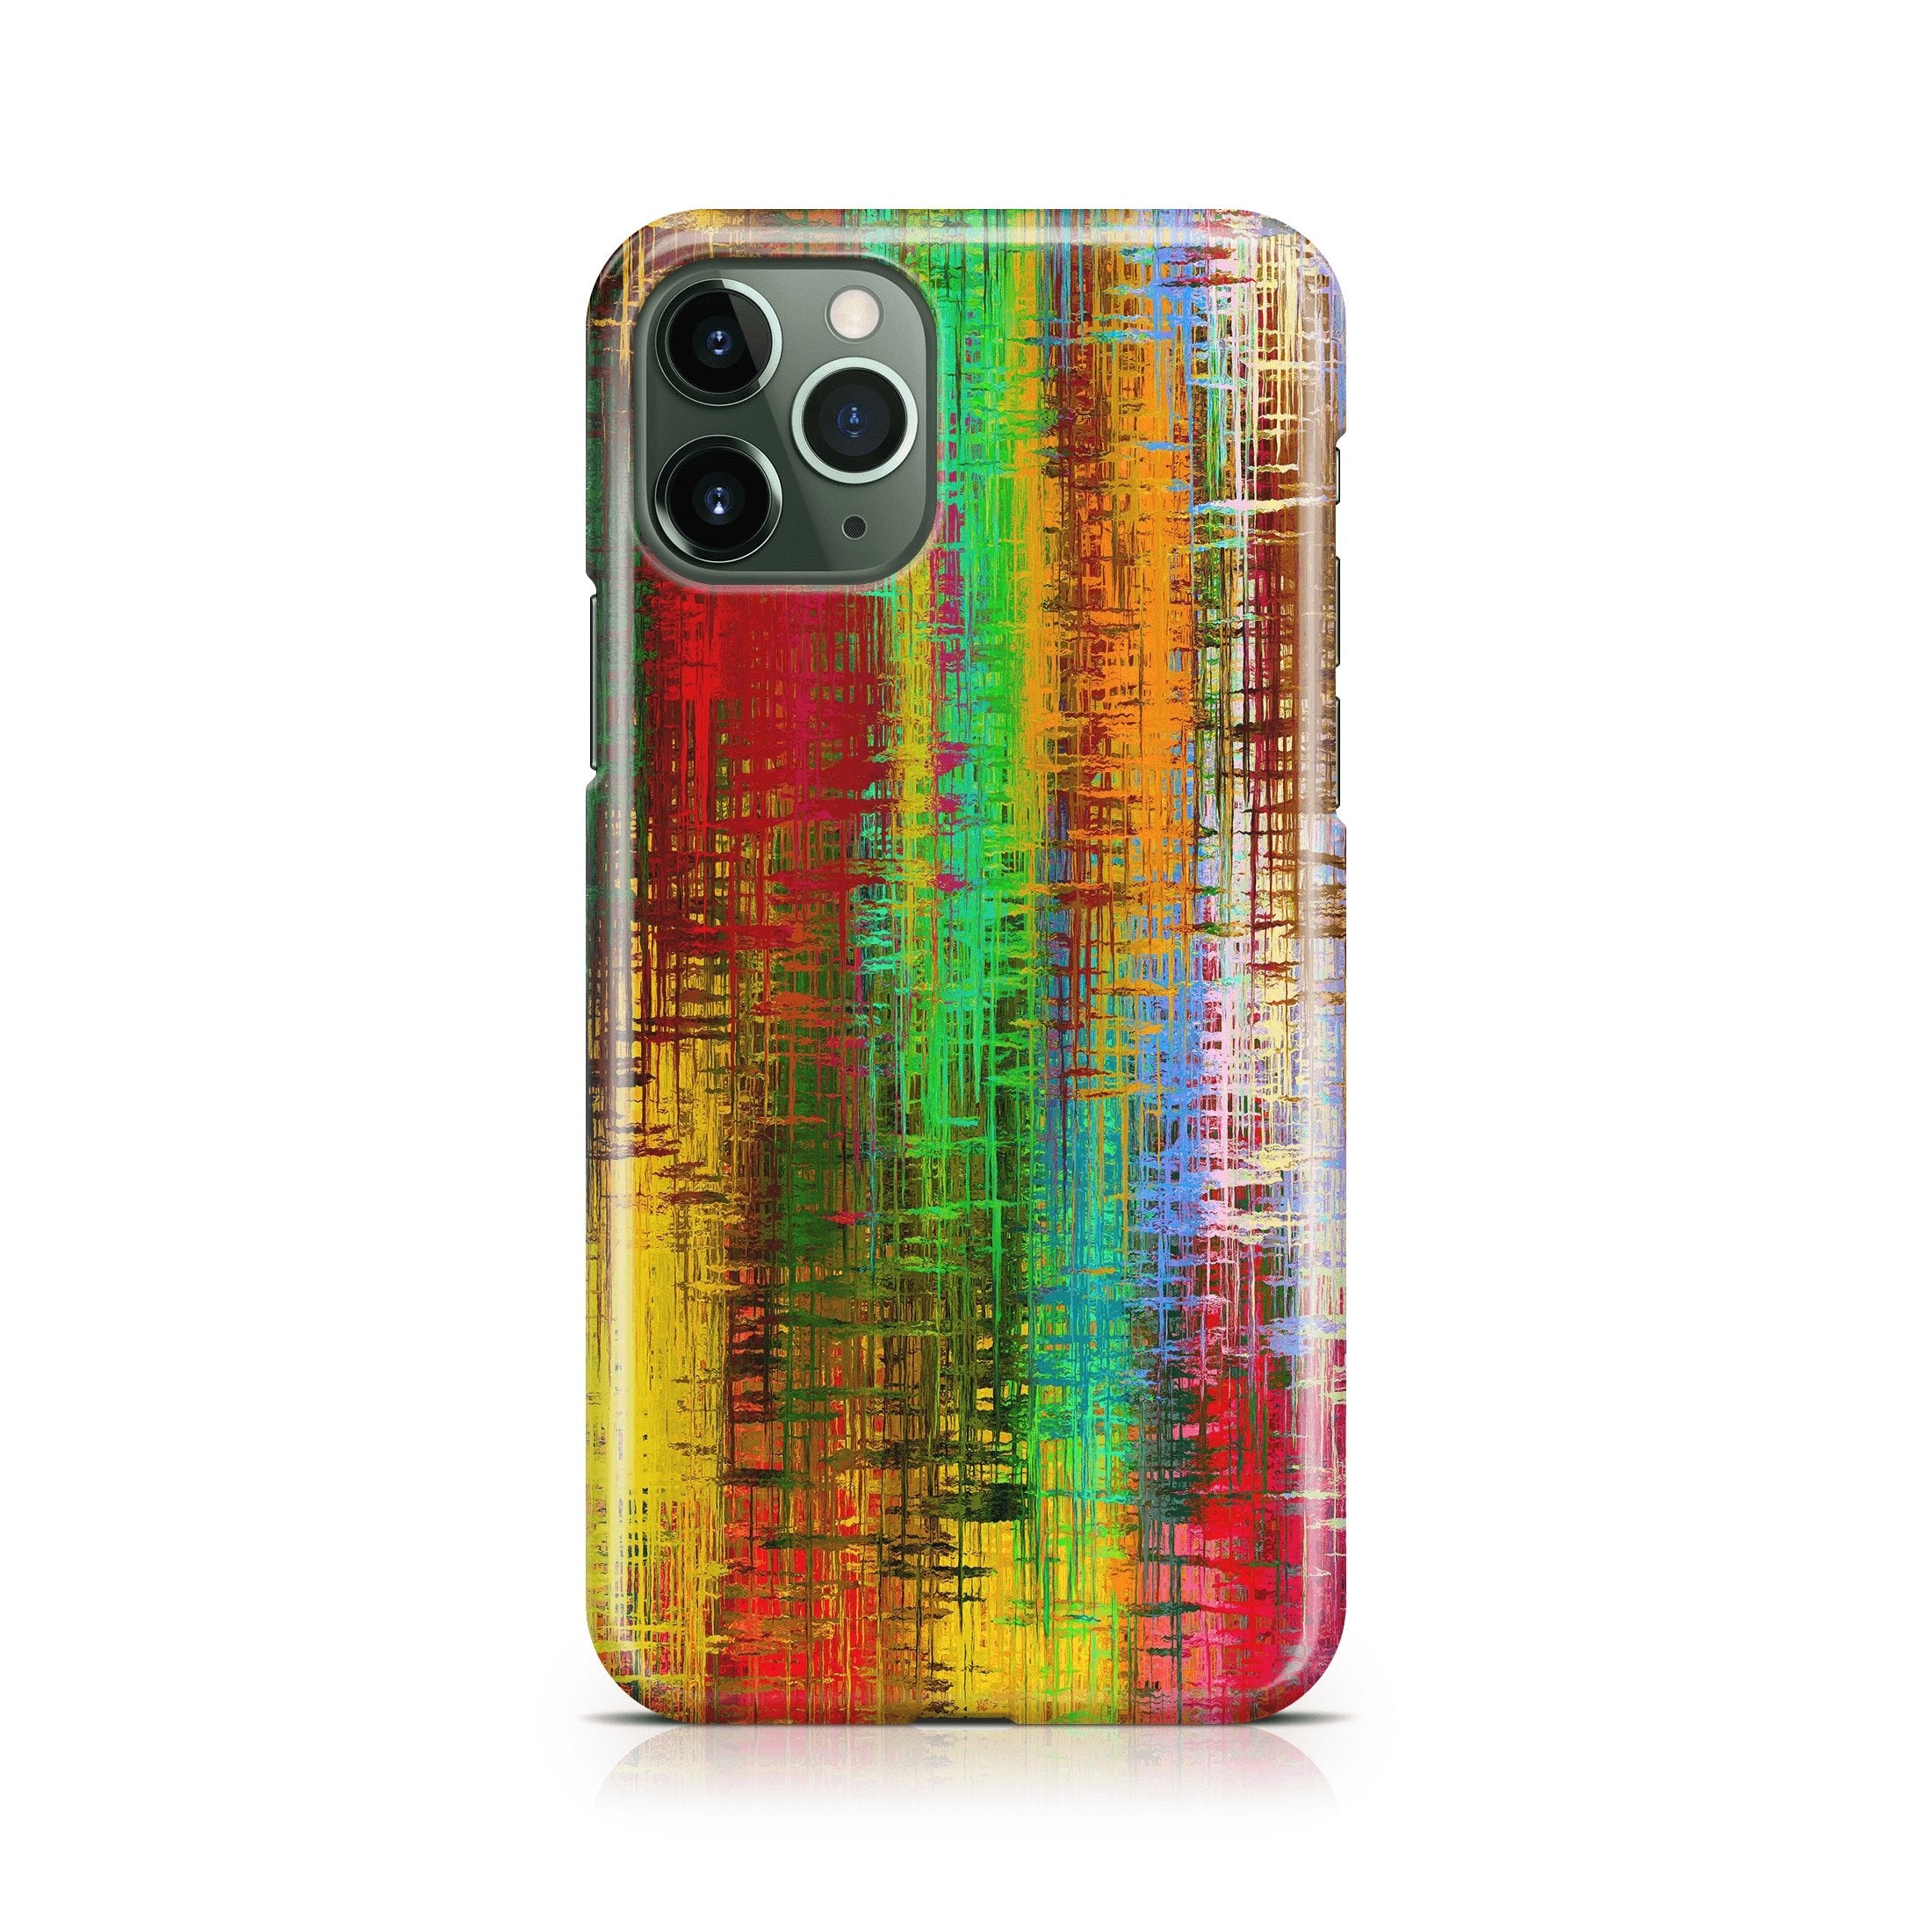 Multicolor Splash - iPhone phone case designs by CaseSwagger